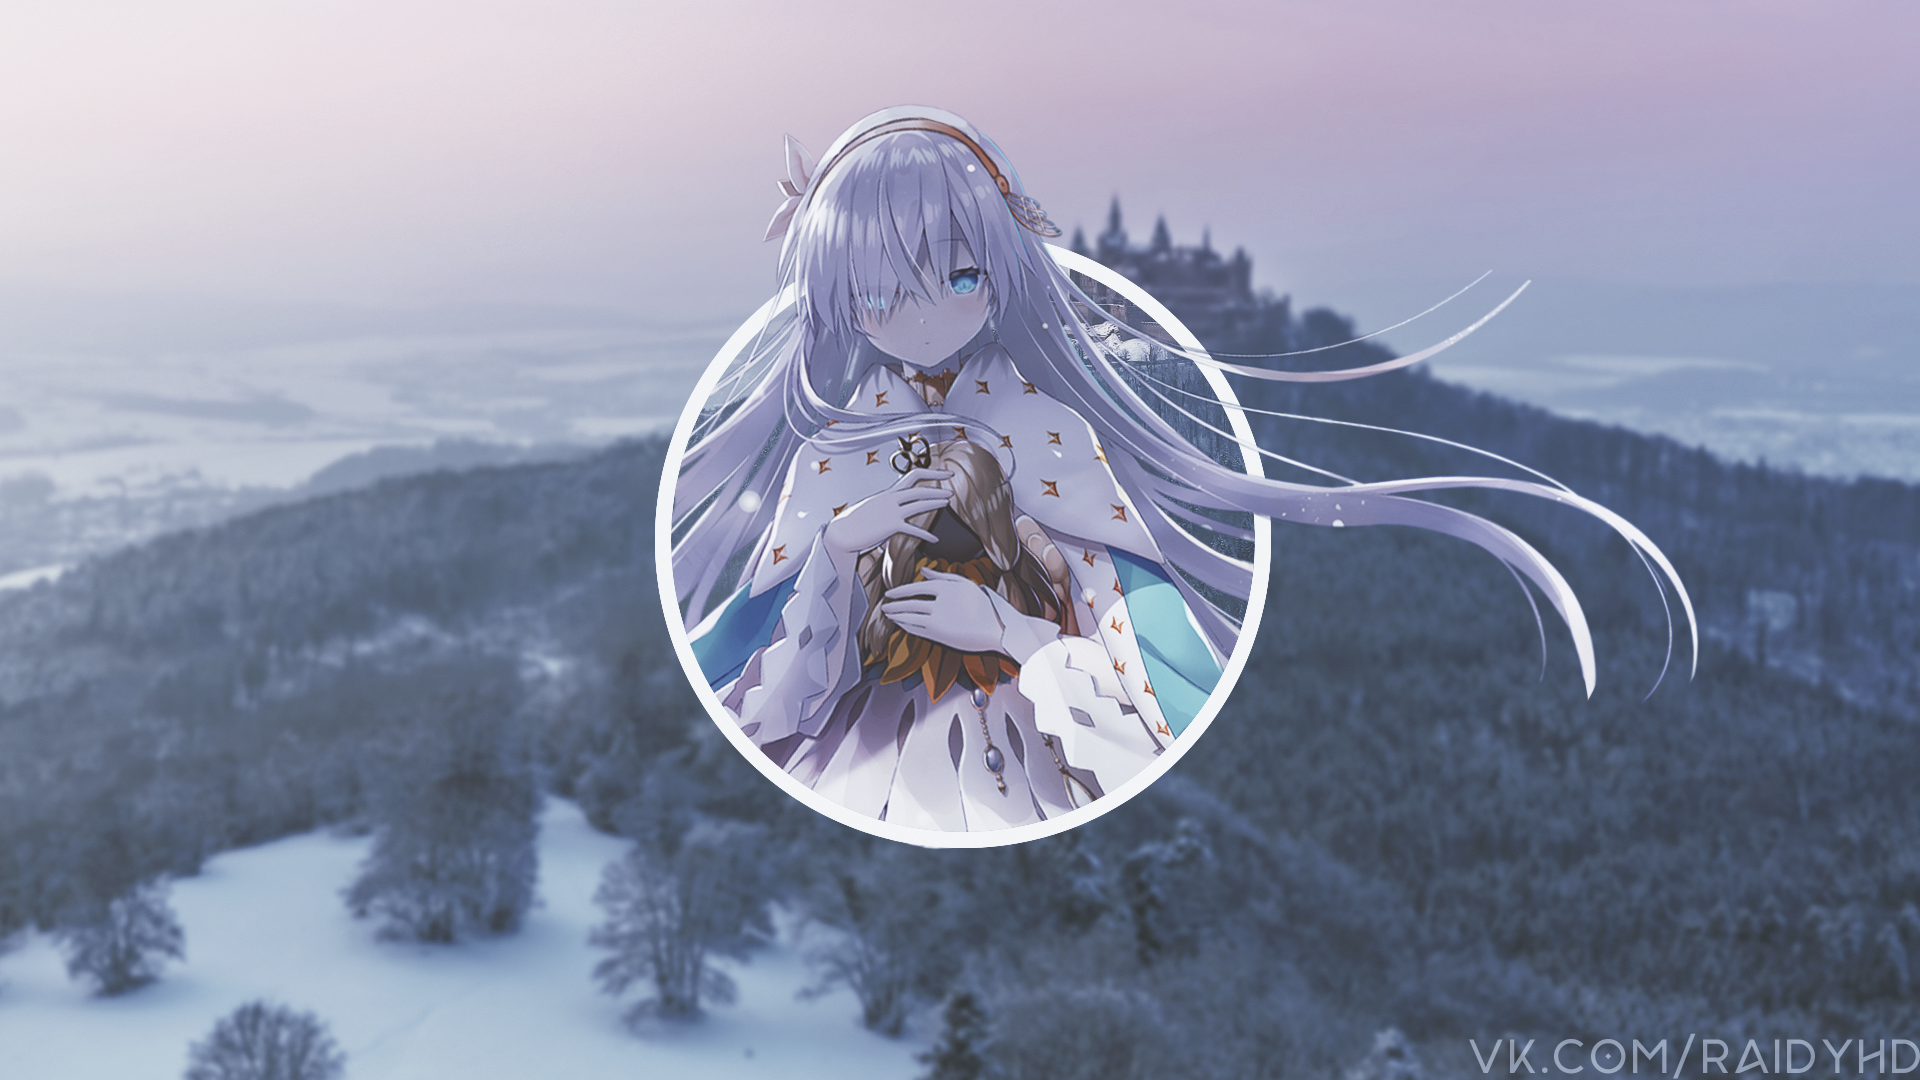 Anime 1920x1080 anime girls winter anime picture-in-picture watermarked